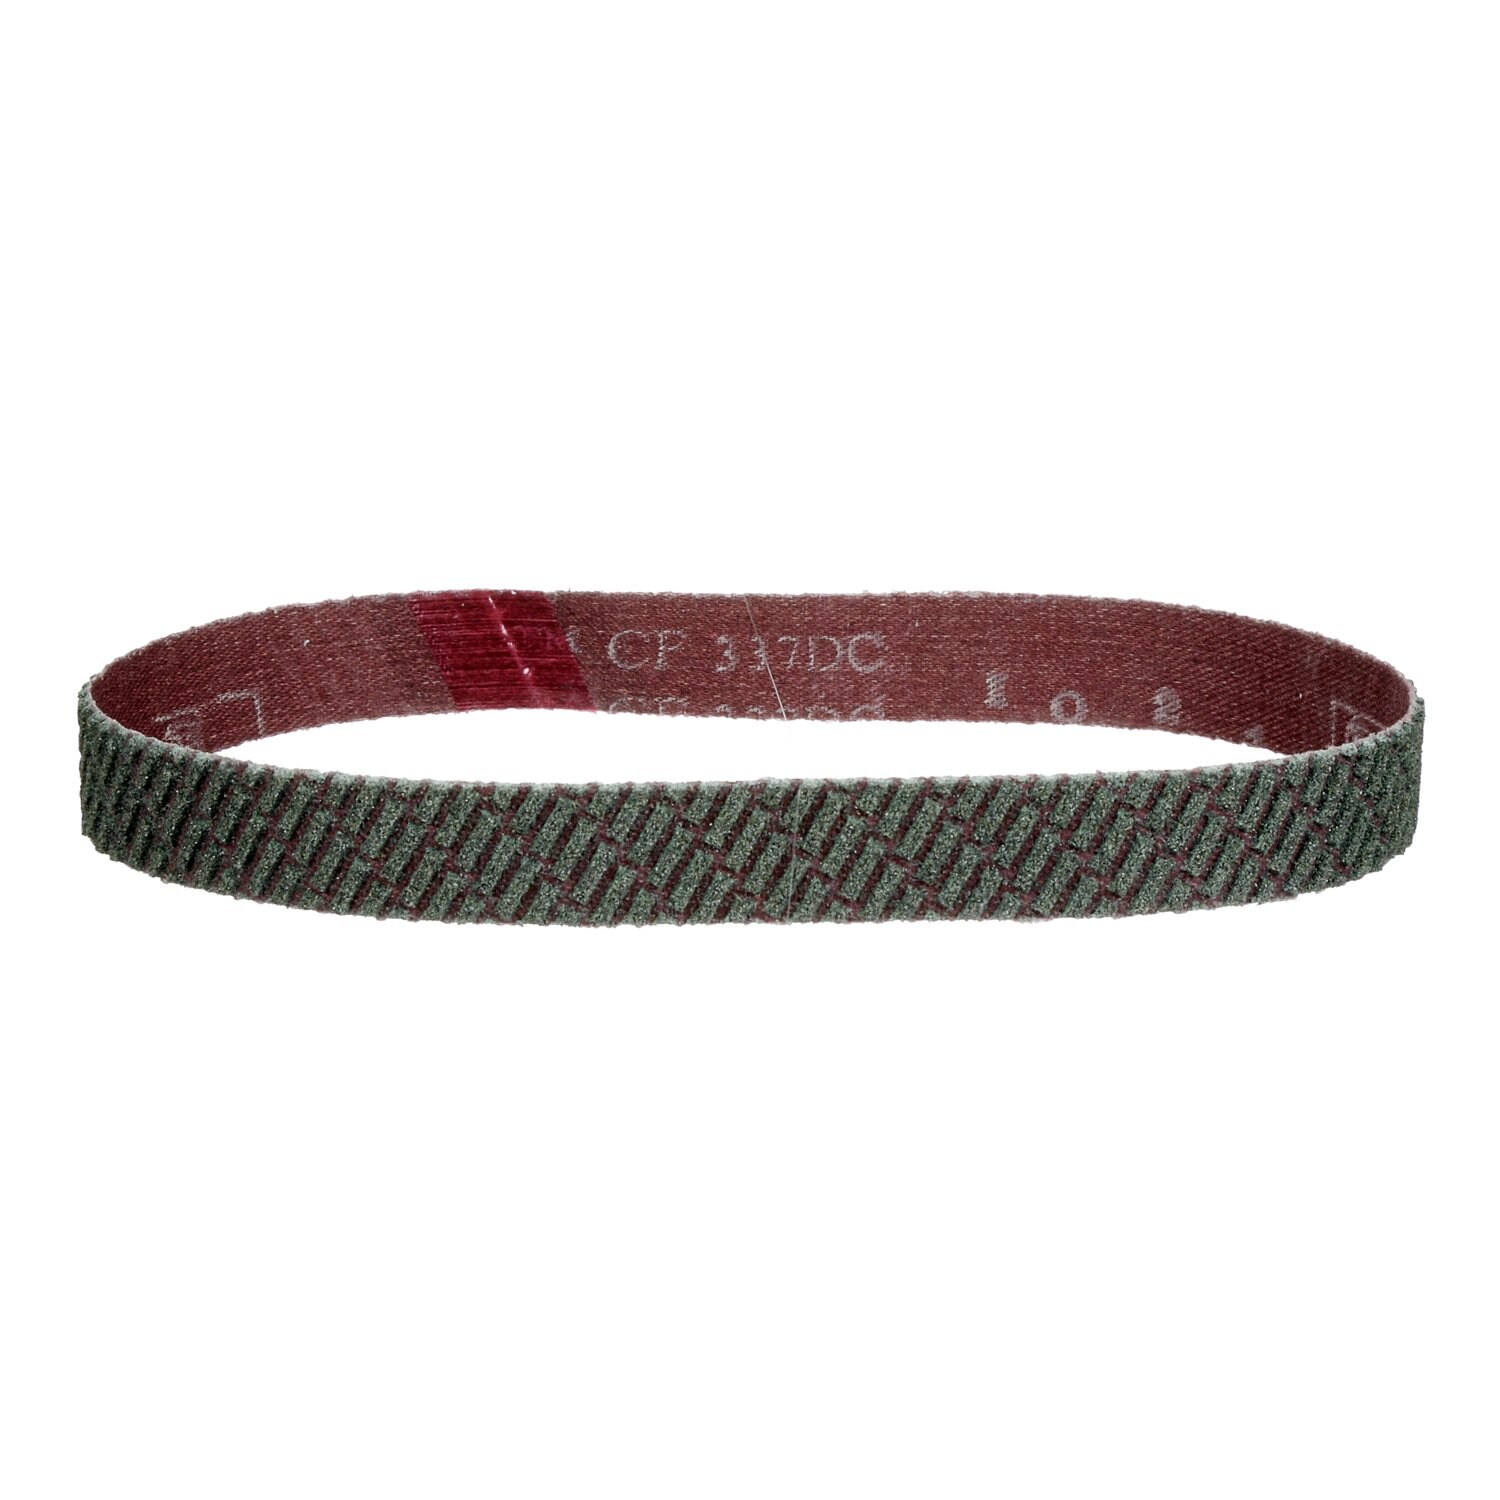 7010365332 - 3M Trizact Cloth Belt 337DC, 1/2 in X 24 in A300 X-weight, 20 ea/Case